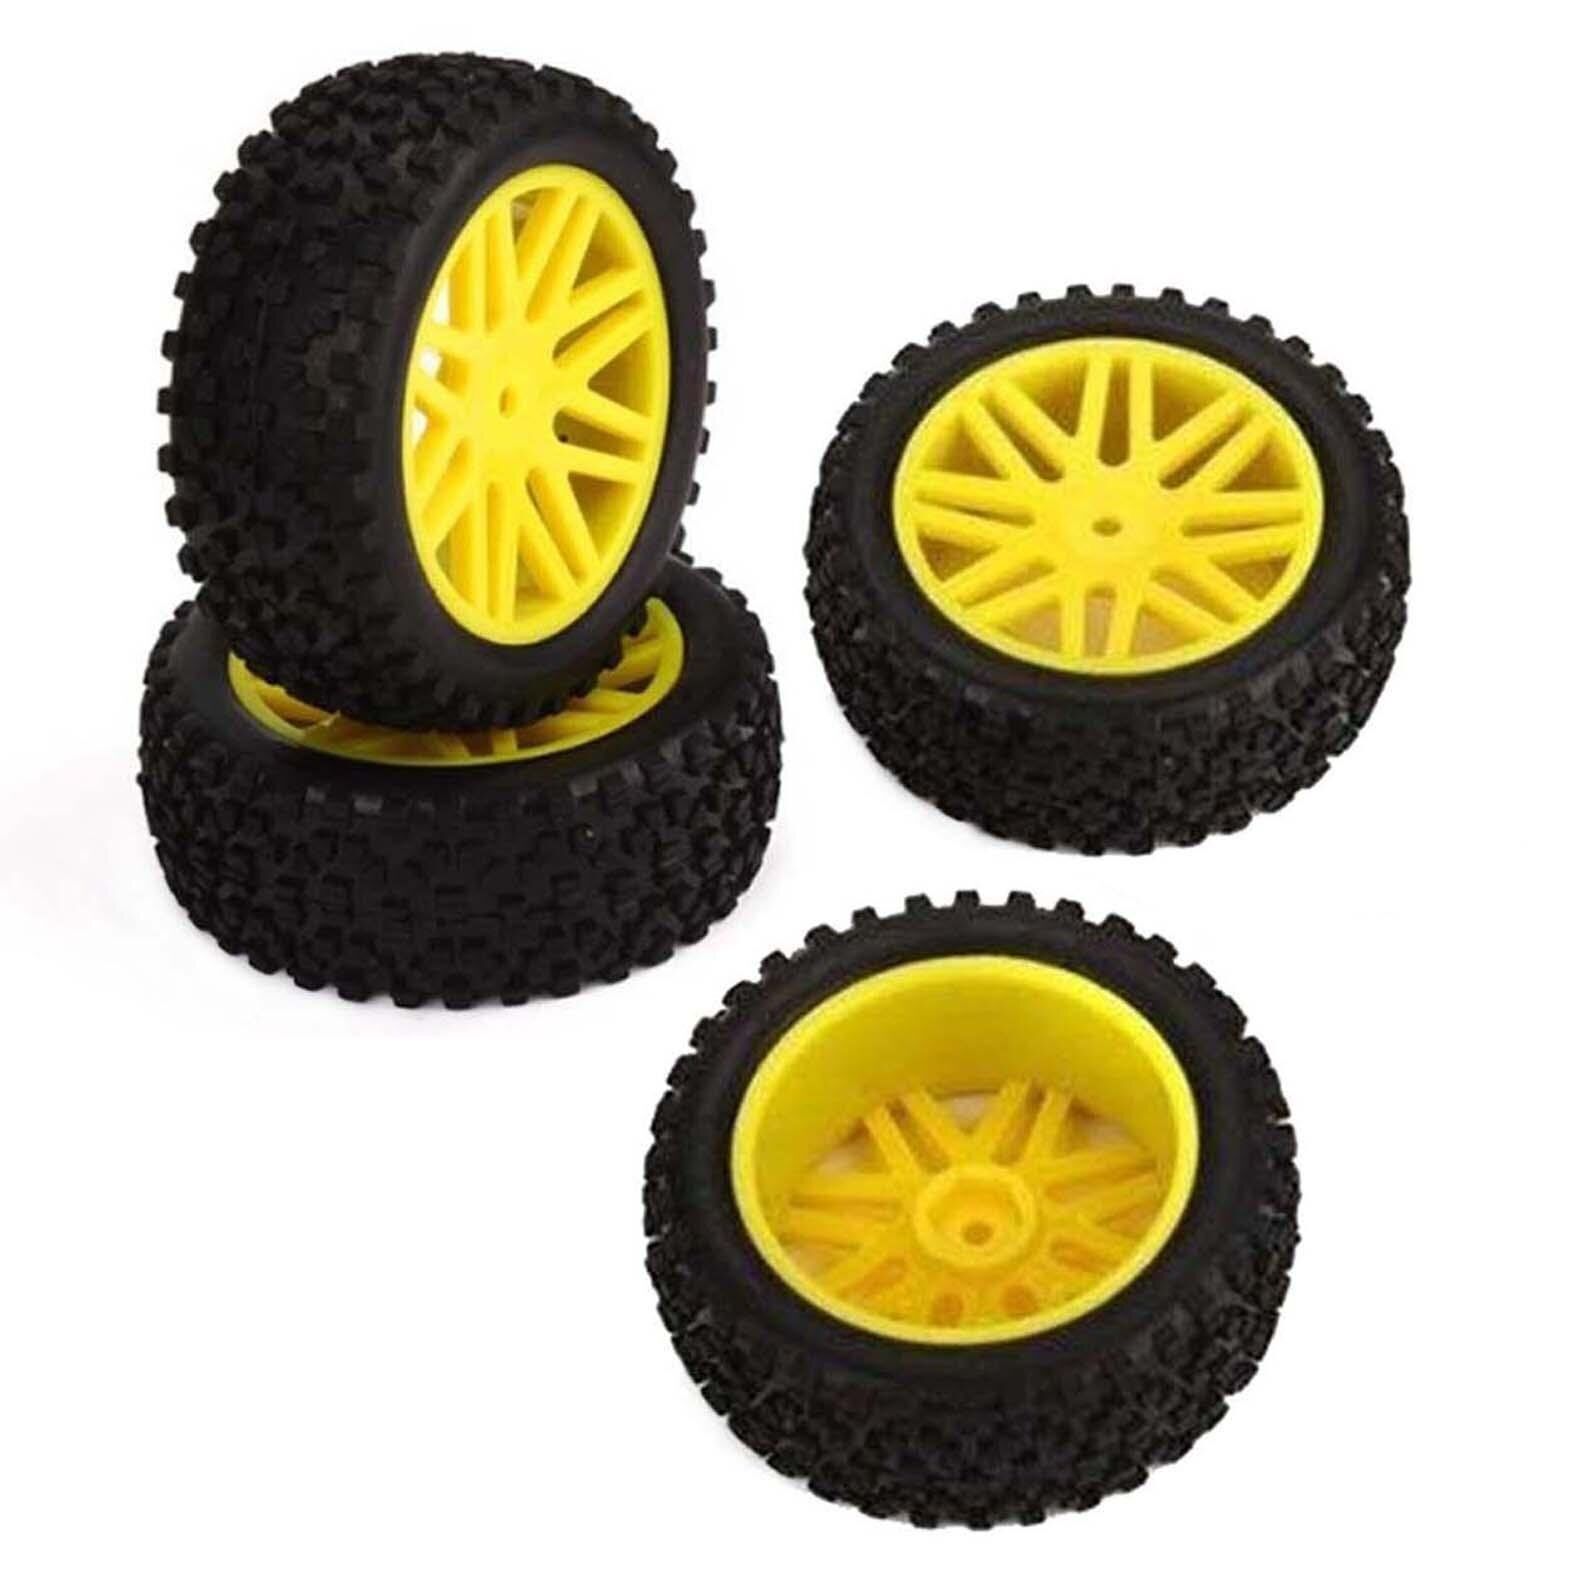 HOBBYPOWER 4pcs Wheel Rim & Rubber Tire (Front & Rear) For RC 1/10 Of...